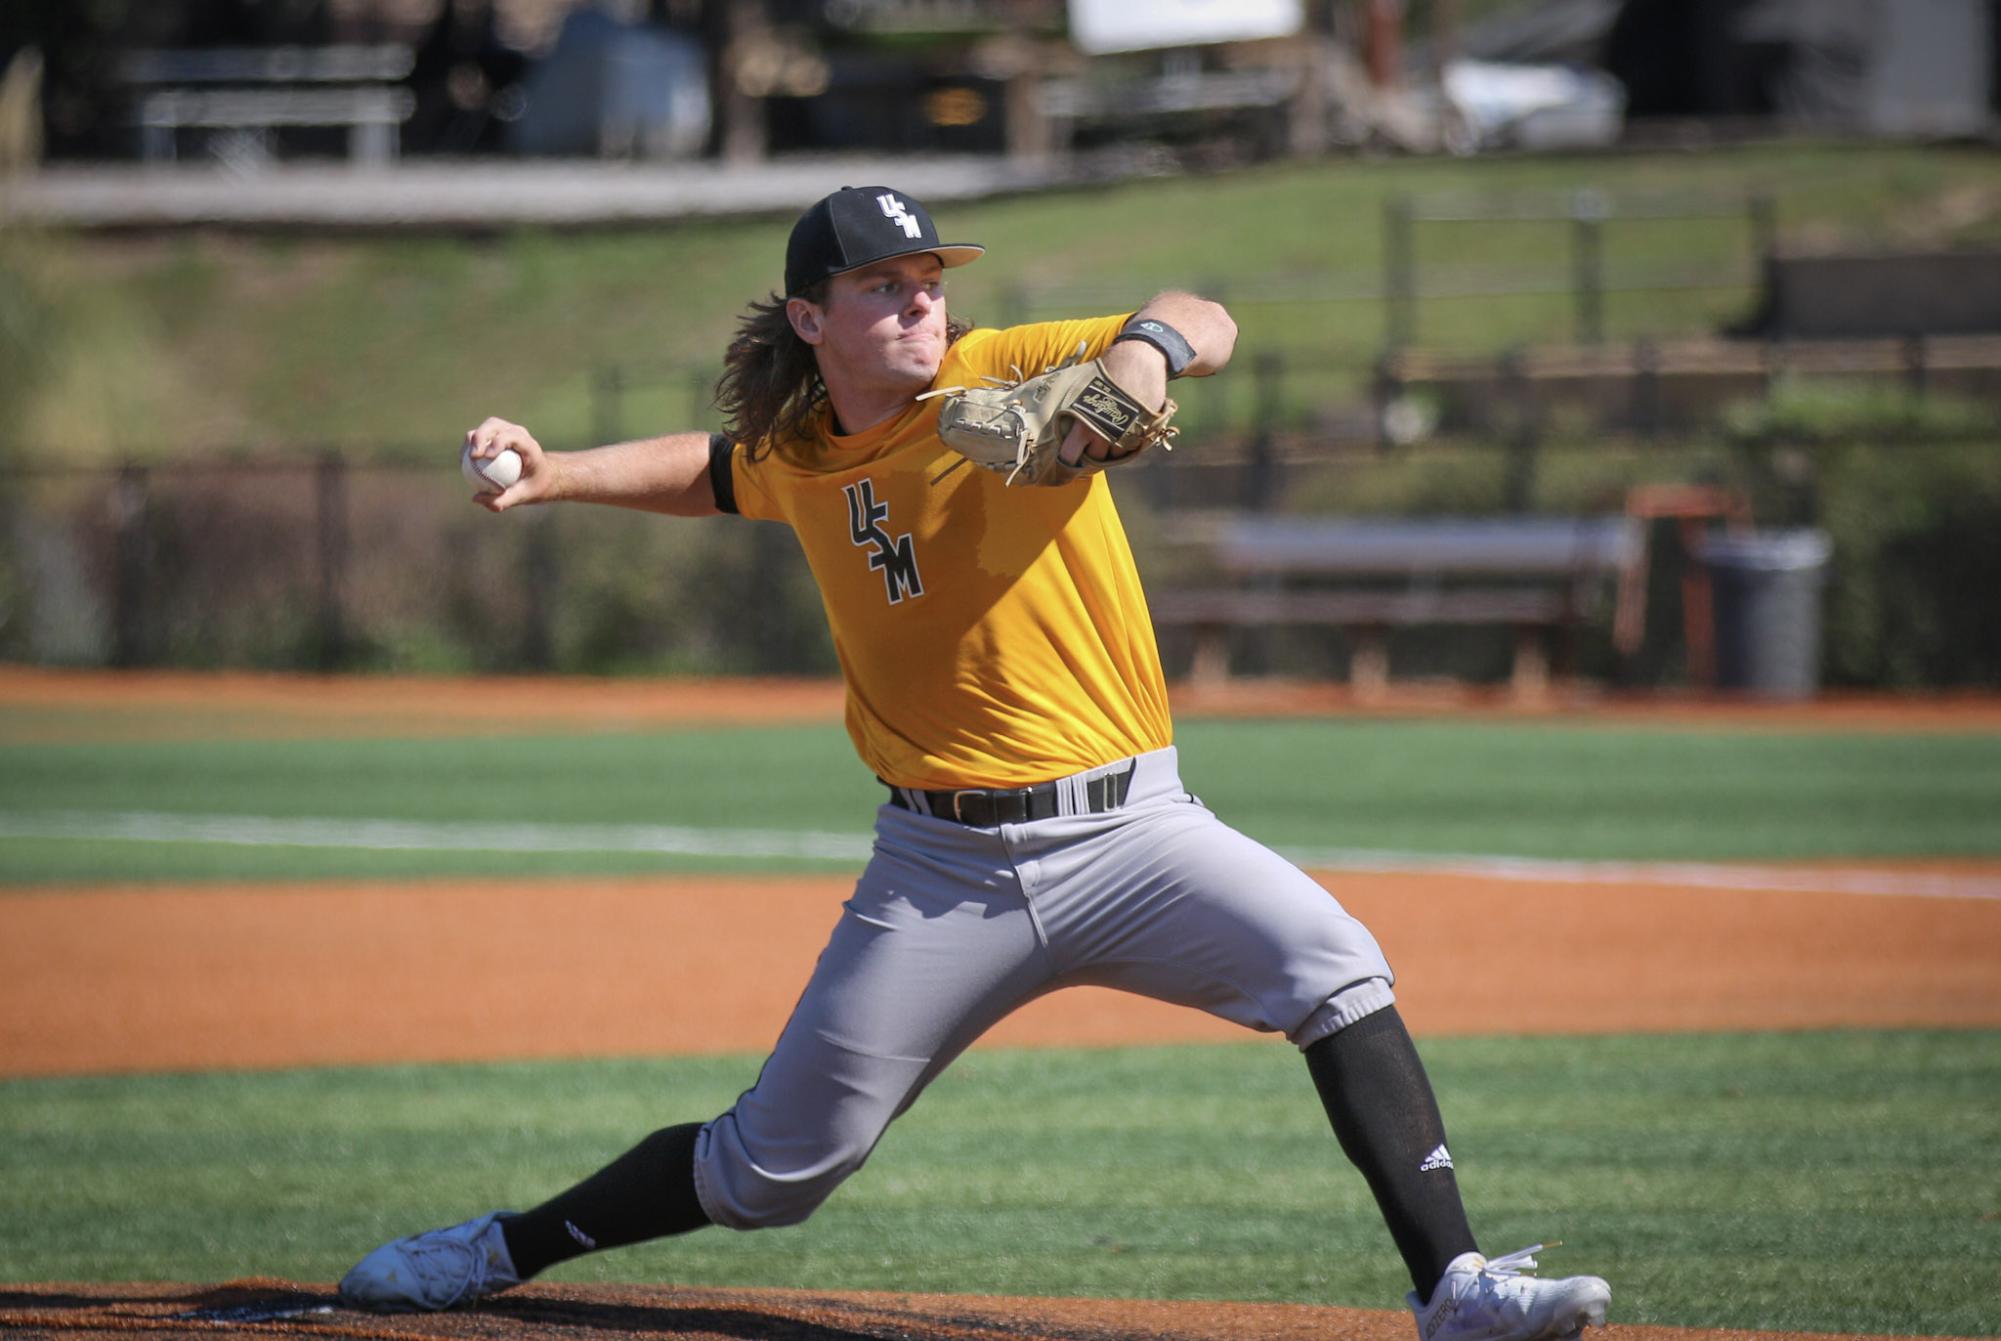 Southern Miss baseball pitching preview and projected staring rotation